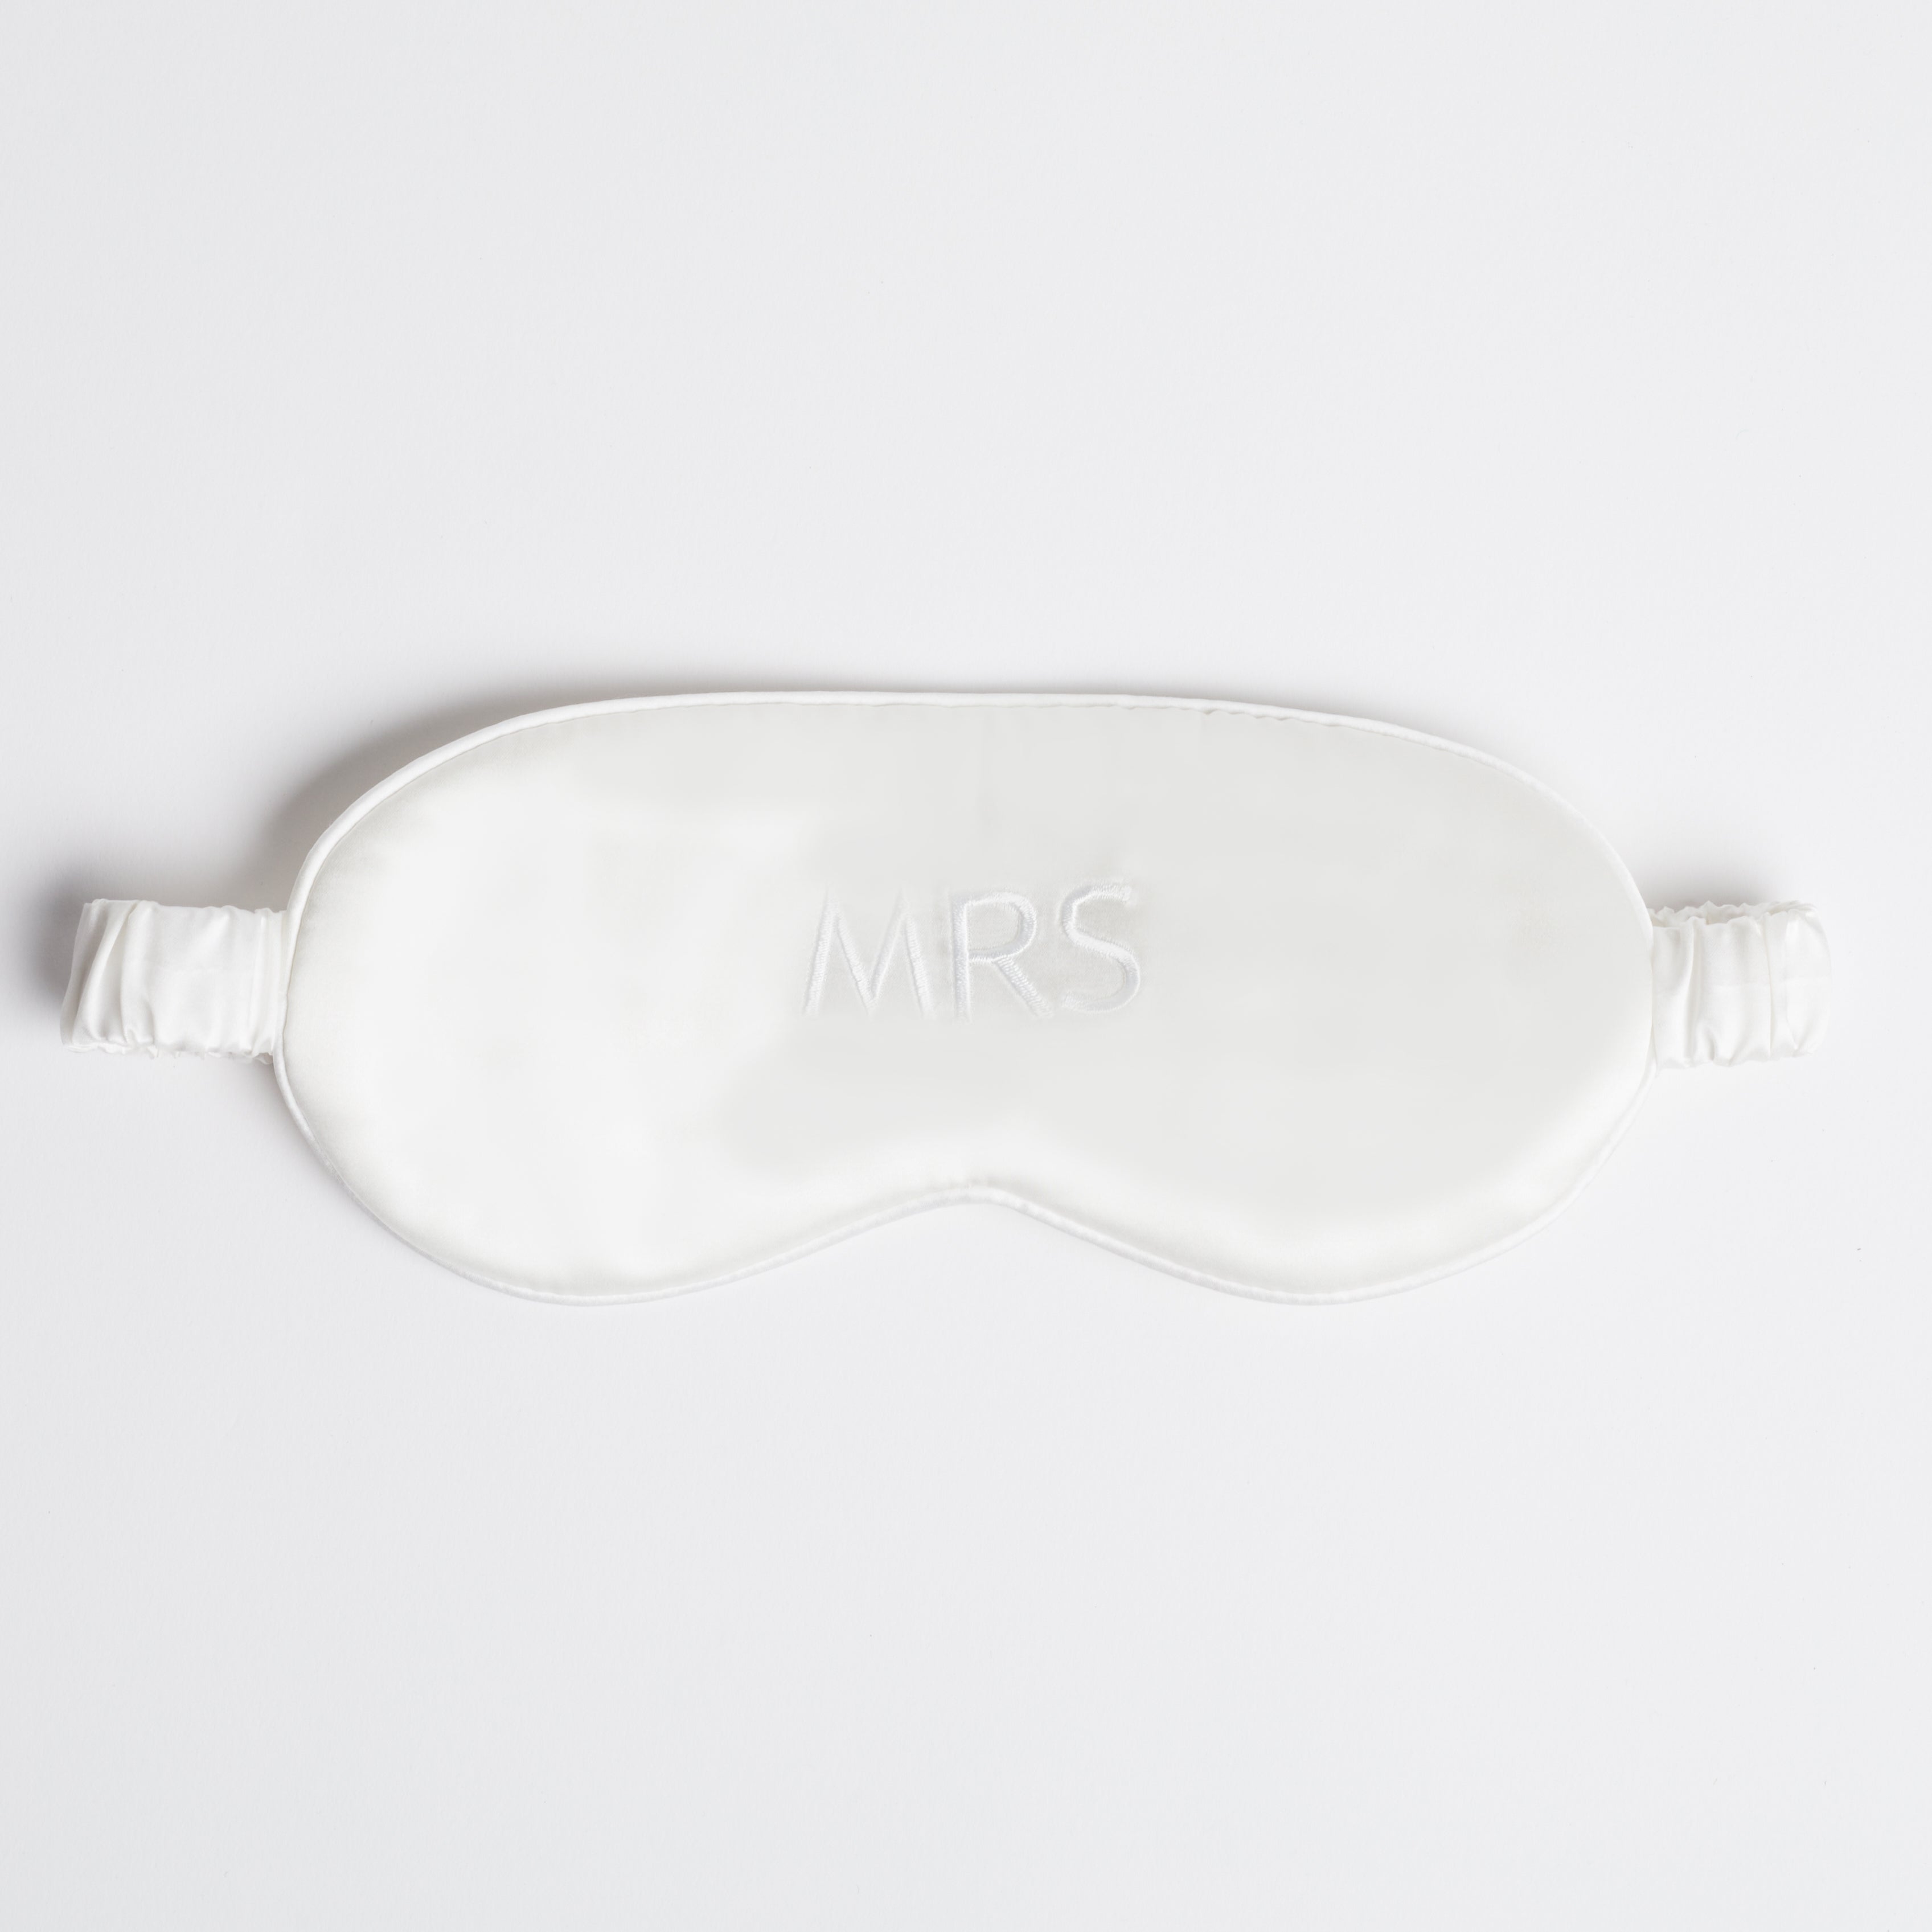 White silk eye mask with &quot;MRS&quot; written across it, lying on a white background.